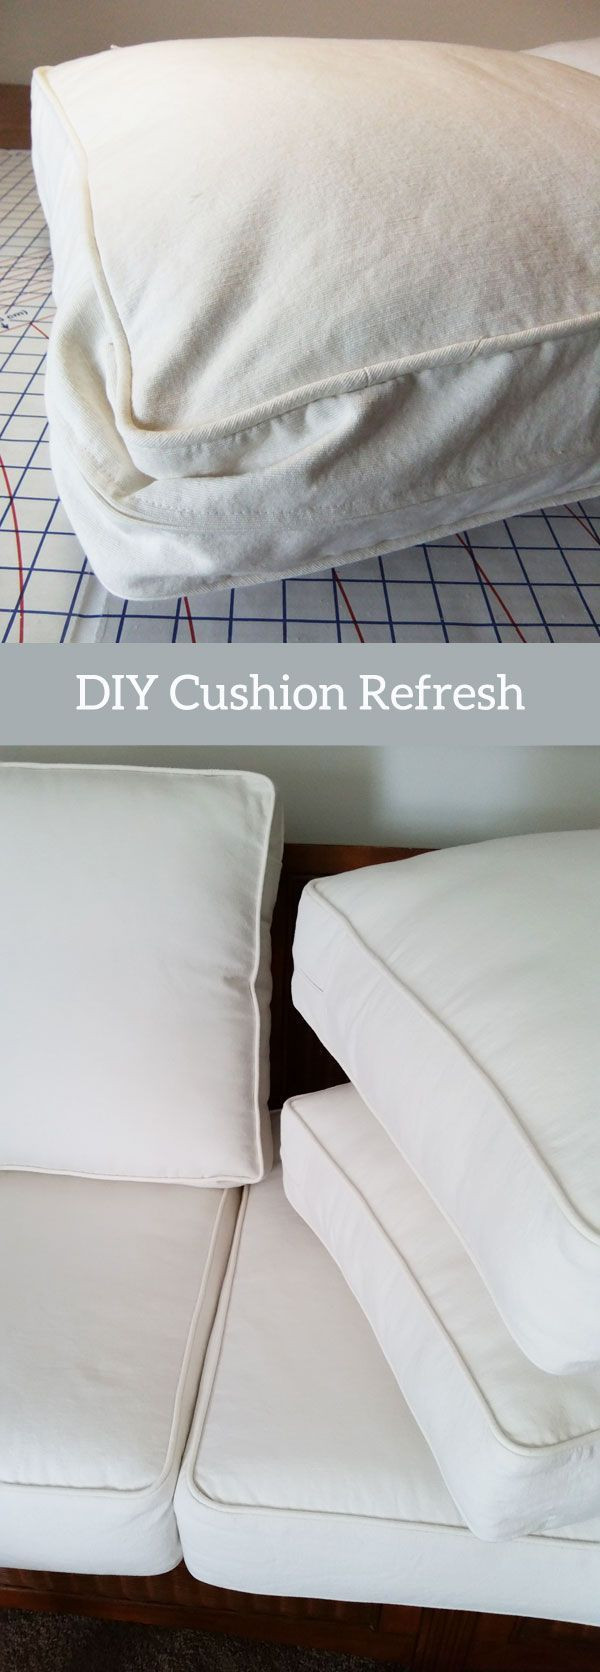 DIY Outdoor Couch Cushions
 DIY Cushion Refresh for Your Sofa and Armchair